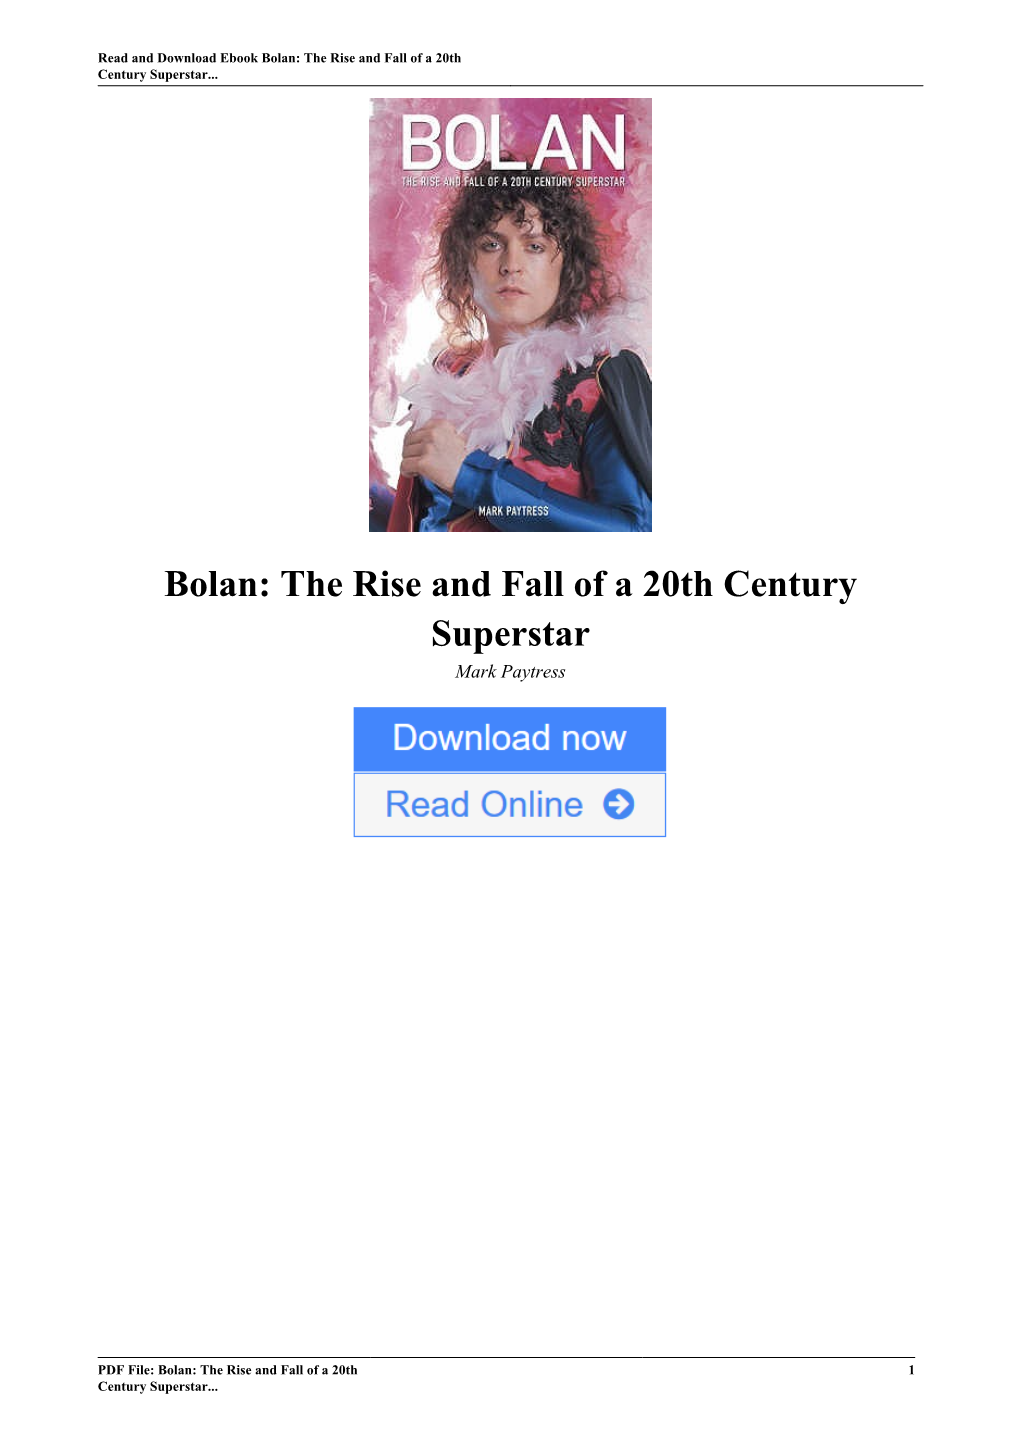 Bolan: the Rise and Fall of a 20Th Century Superstar by Mark Paytress